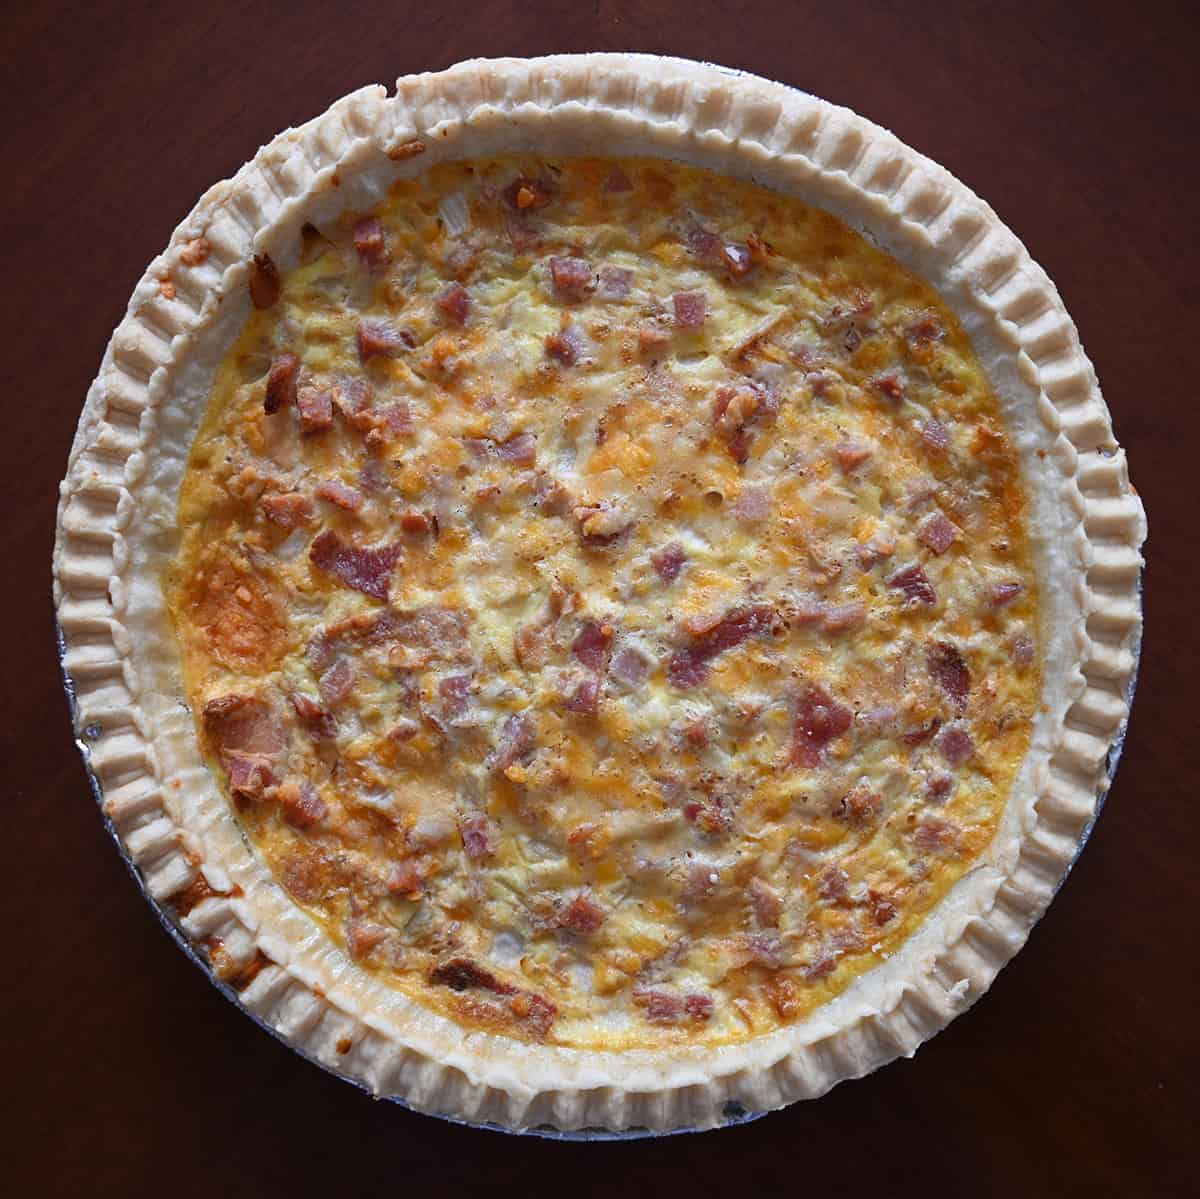 Top down image of the Costco Kirkland Signature Quiche with the lid off prior to baking it.